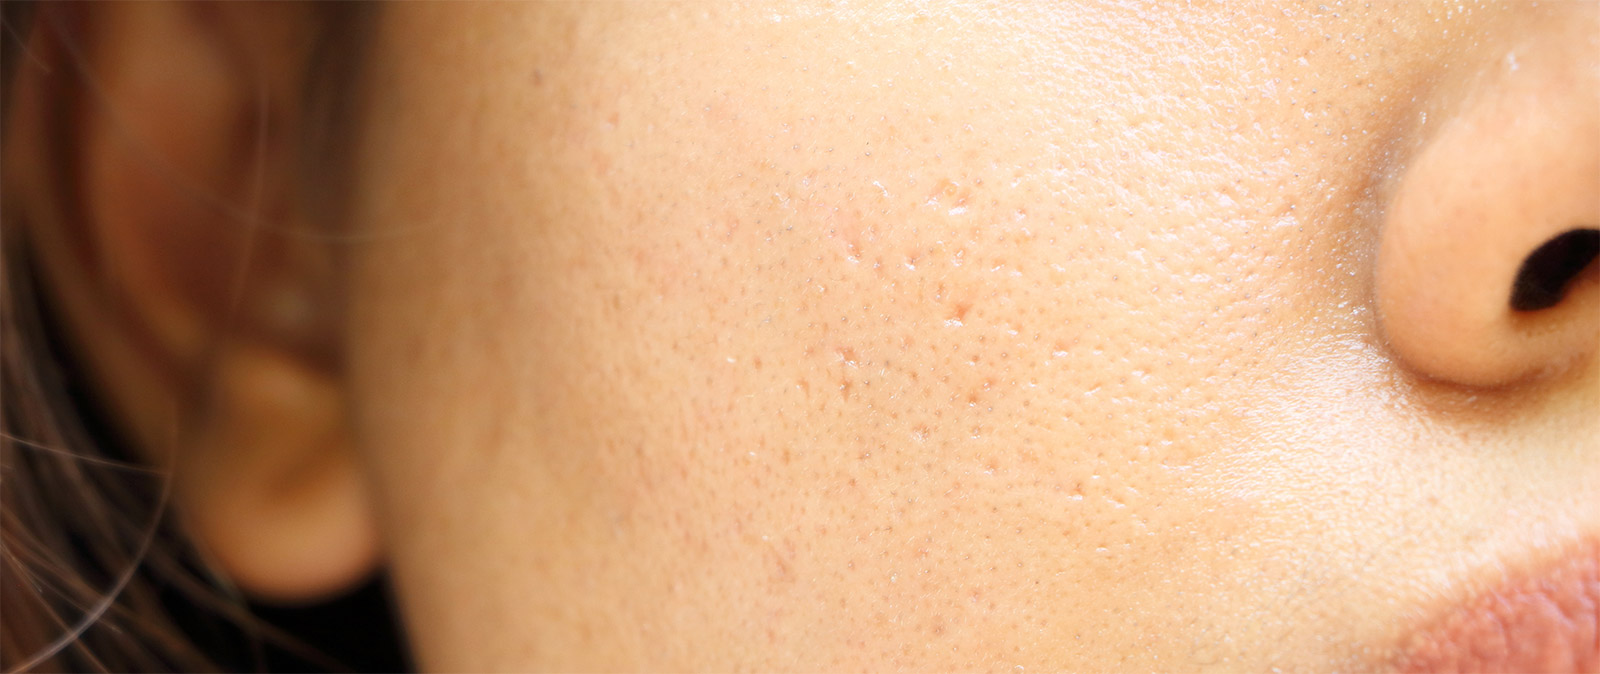 Enlarged Pores Skin Conditions Pacific Derm